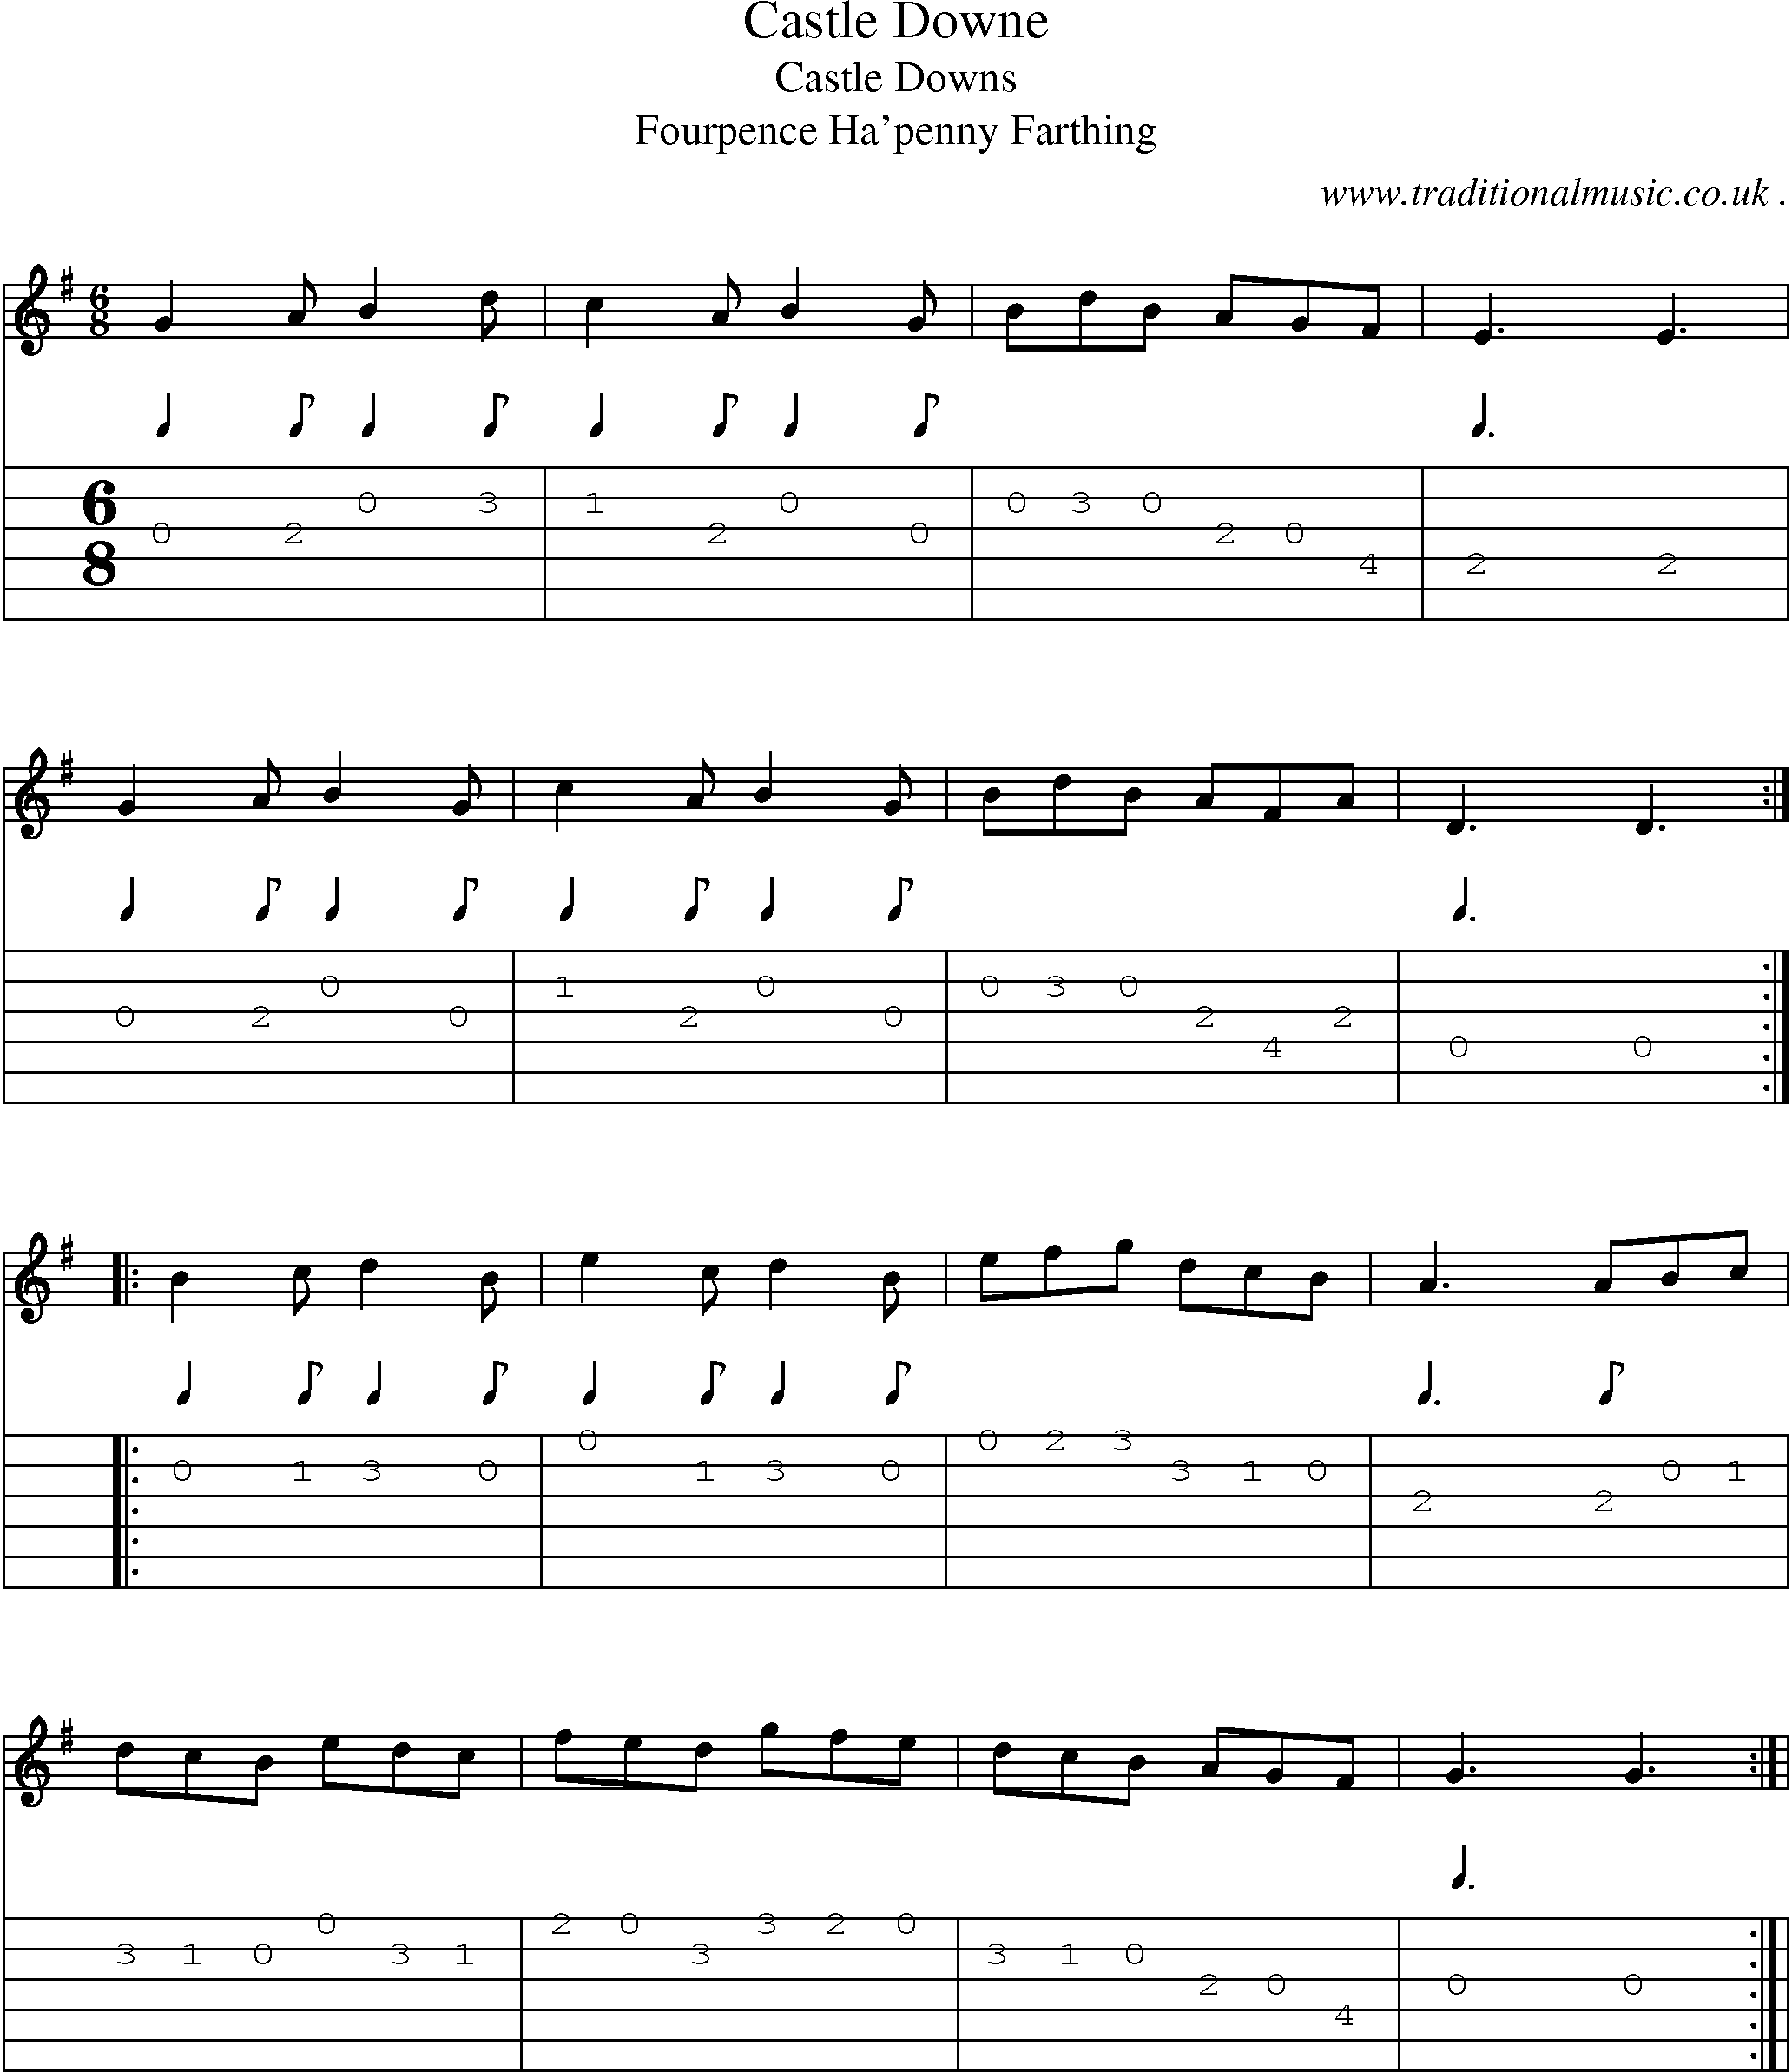 Sheet-Music and Guitar Tabs for Castle Downe